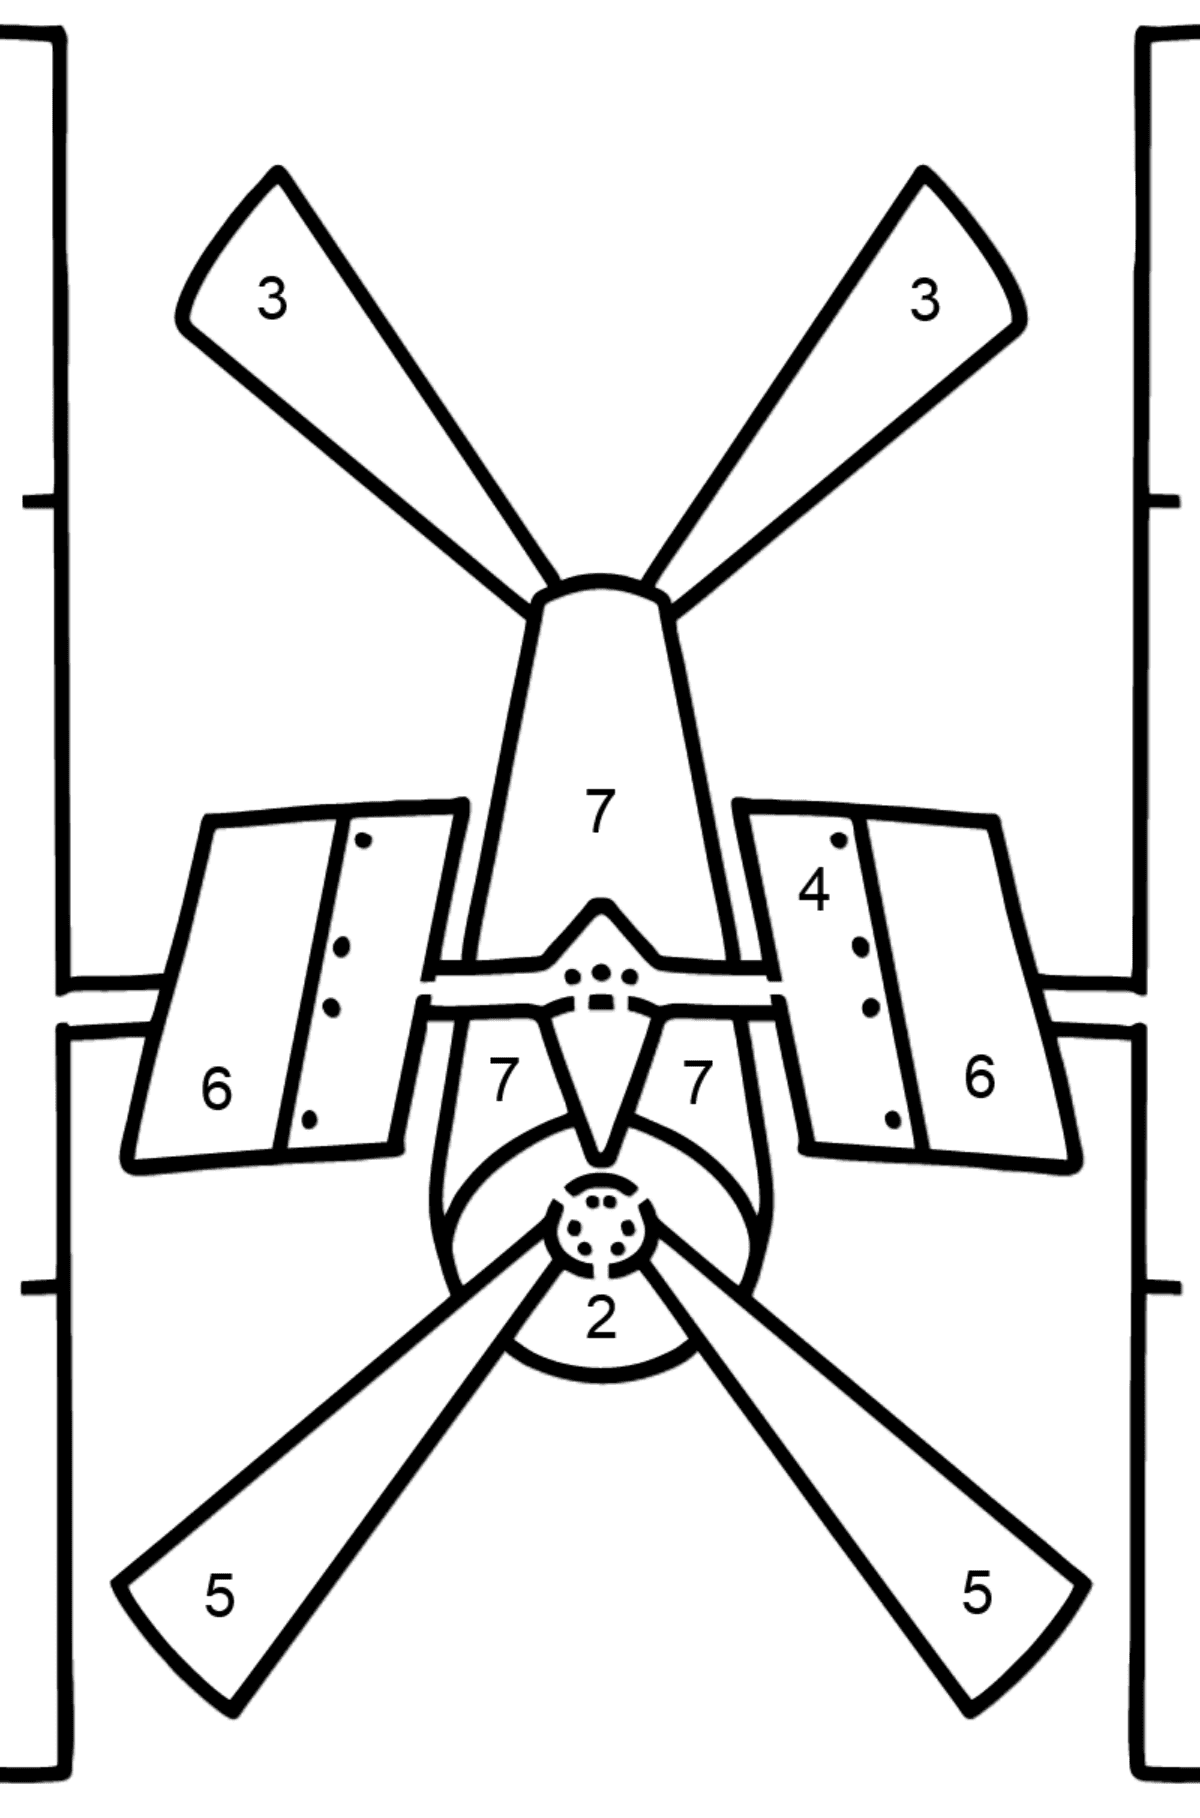 Space Station coloring page - Coloring by Numbers for Kids